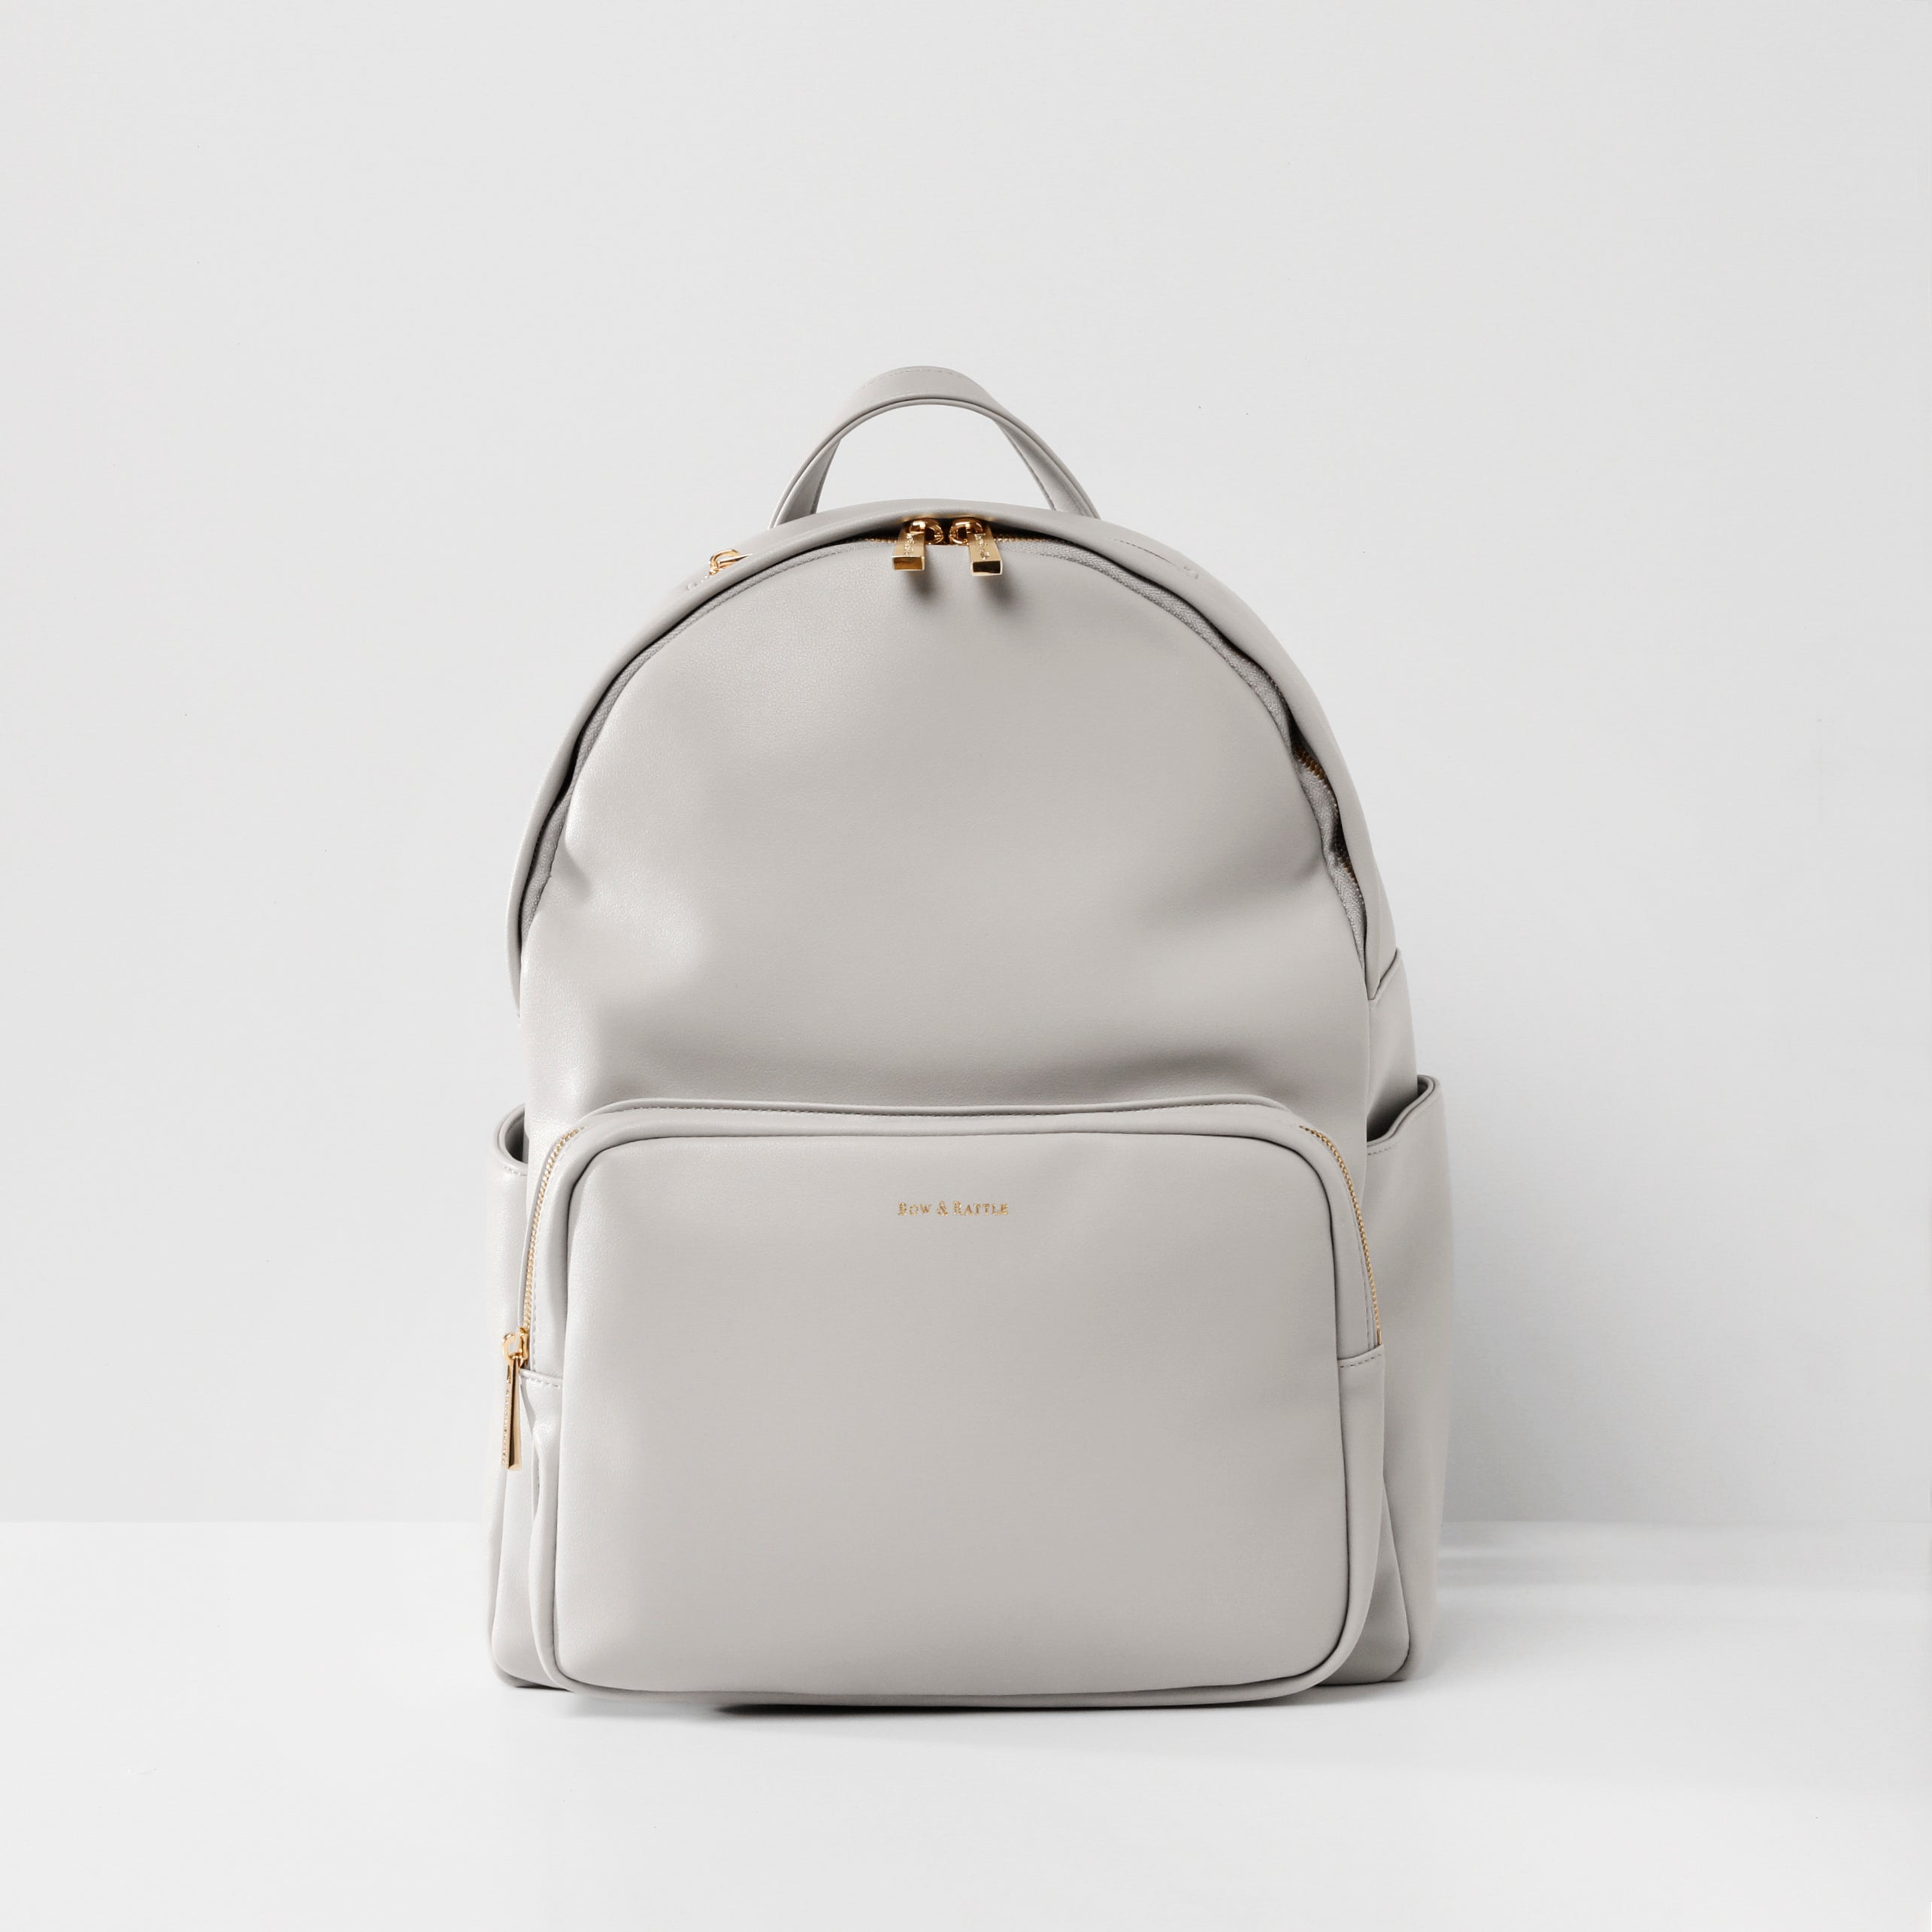 grey baby changing backpack